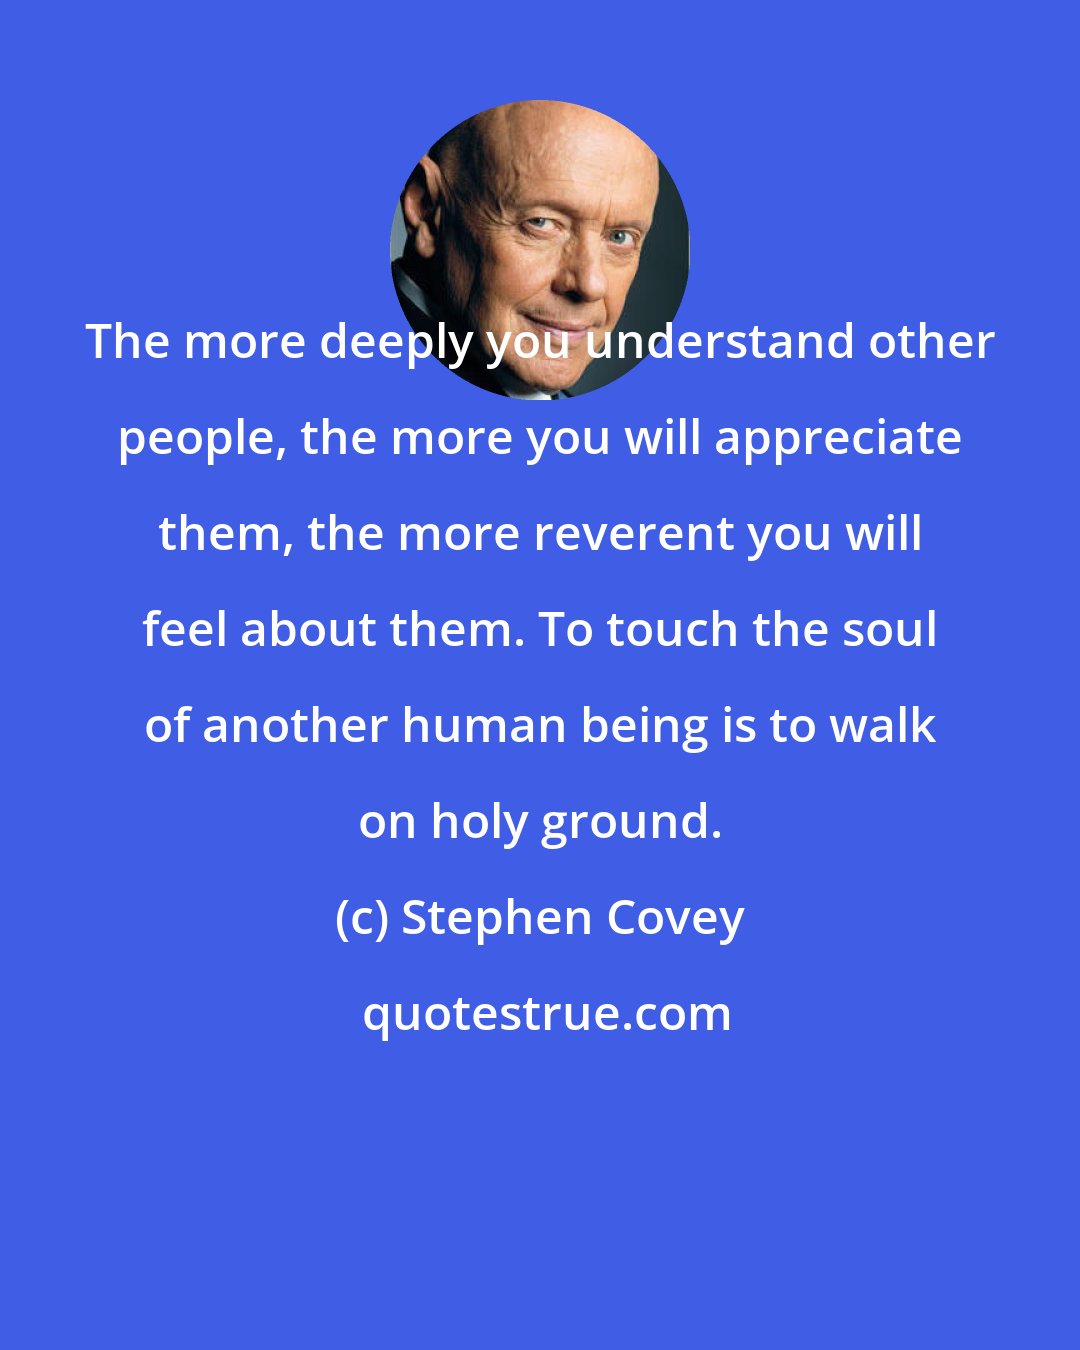 Stephen Covey: The more deeply you understand other people, the more you will appreciate them, the more reverent you will feel about them. To touch the soul of another human being is to walk on holy ground.